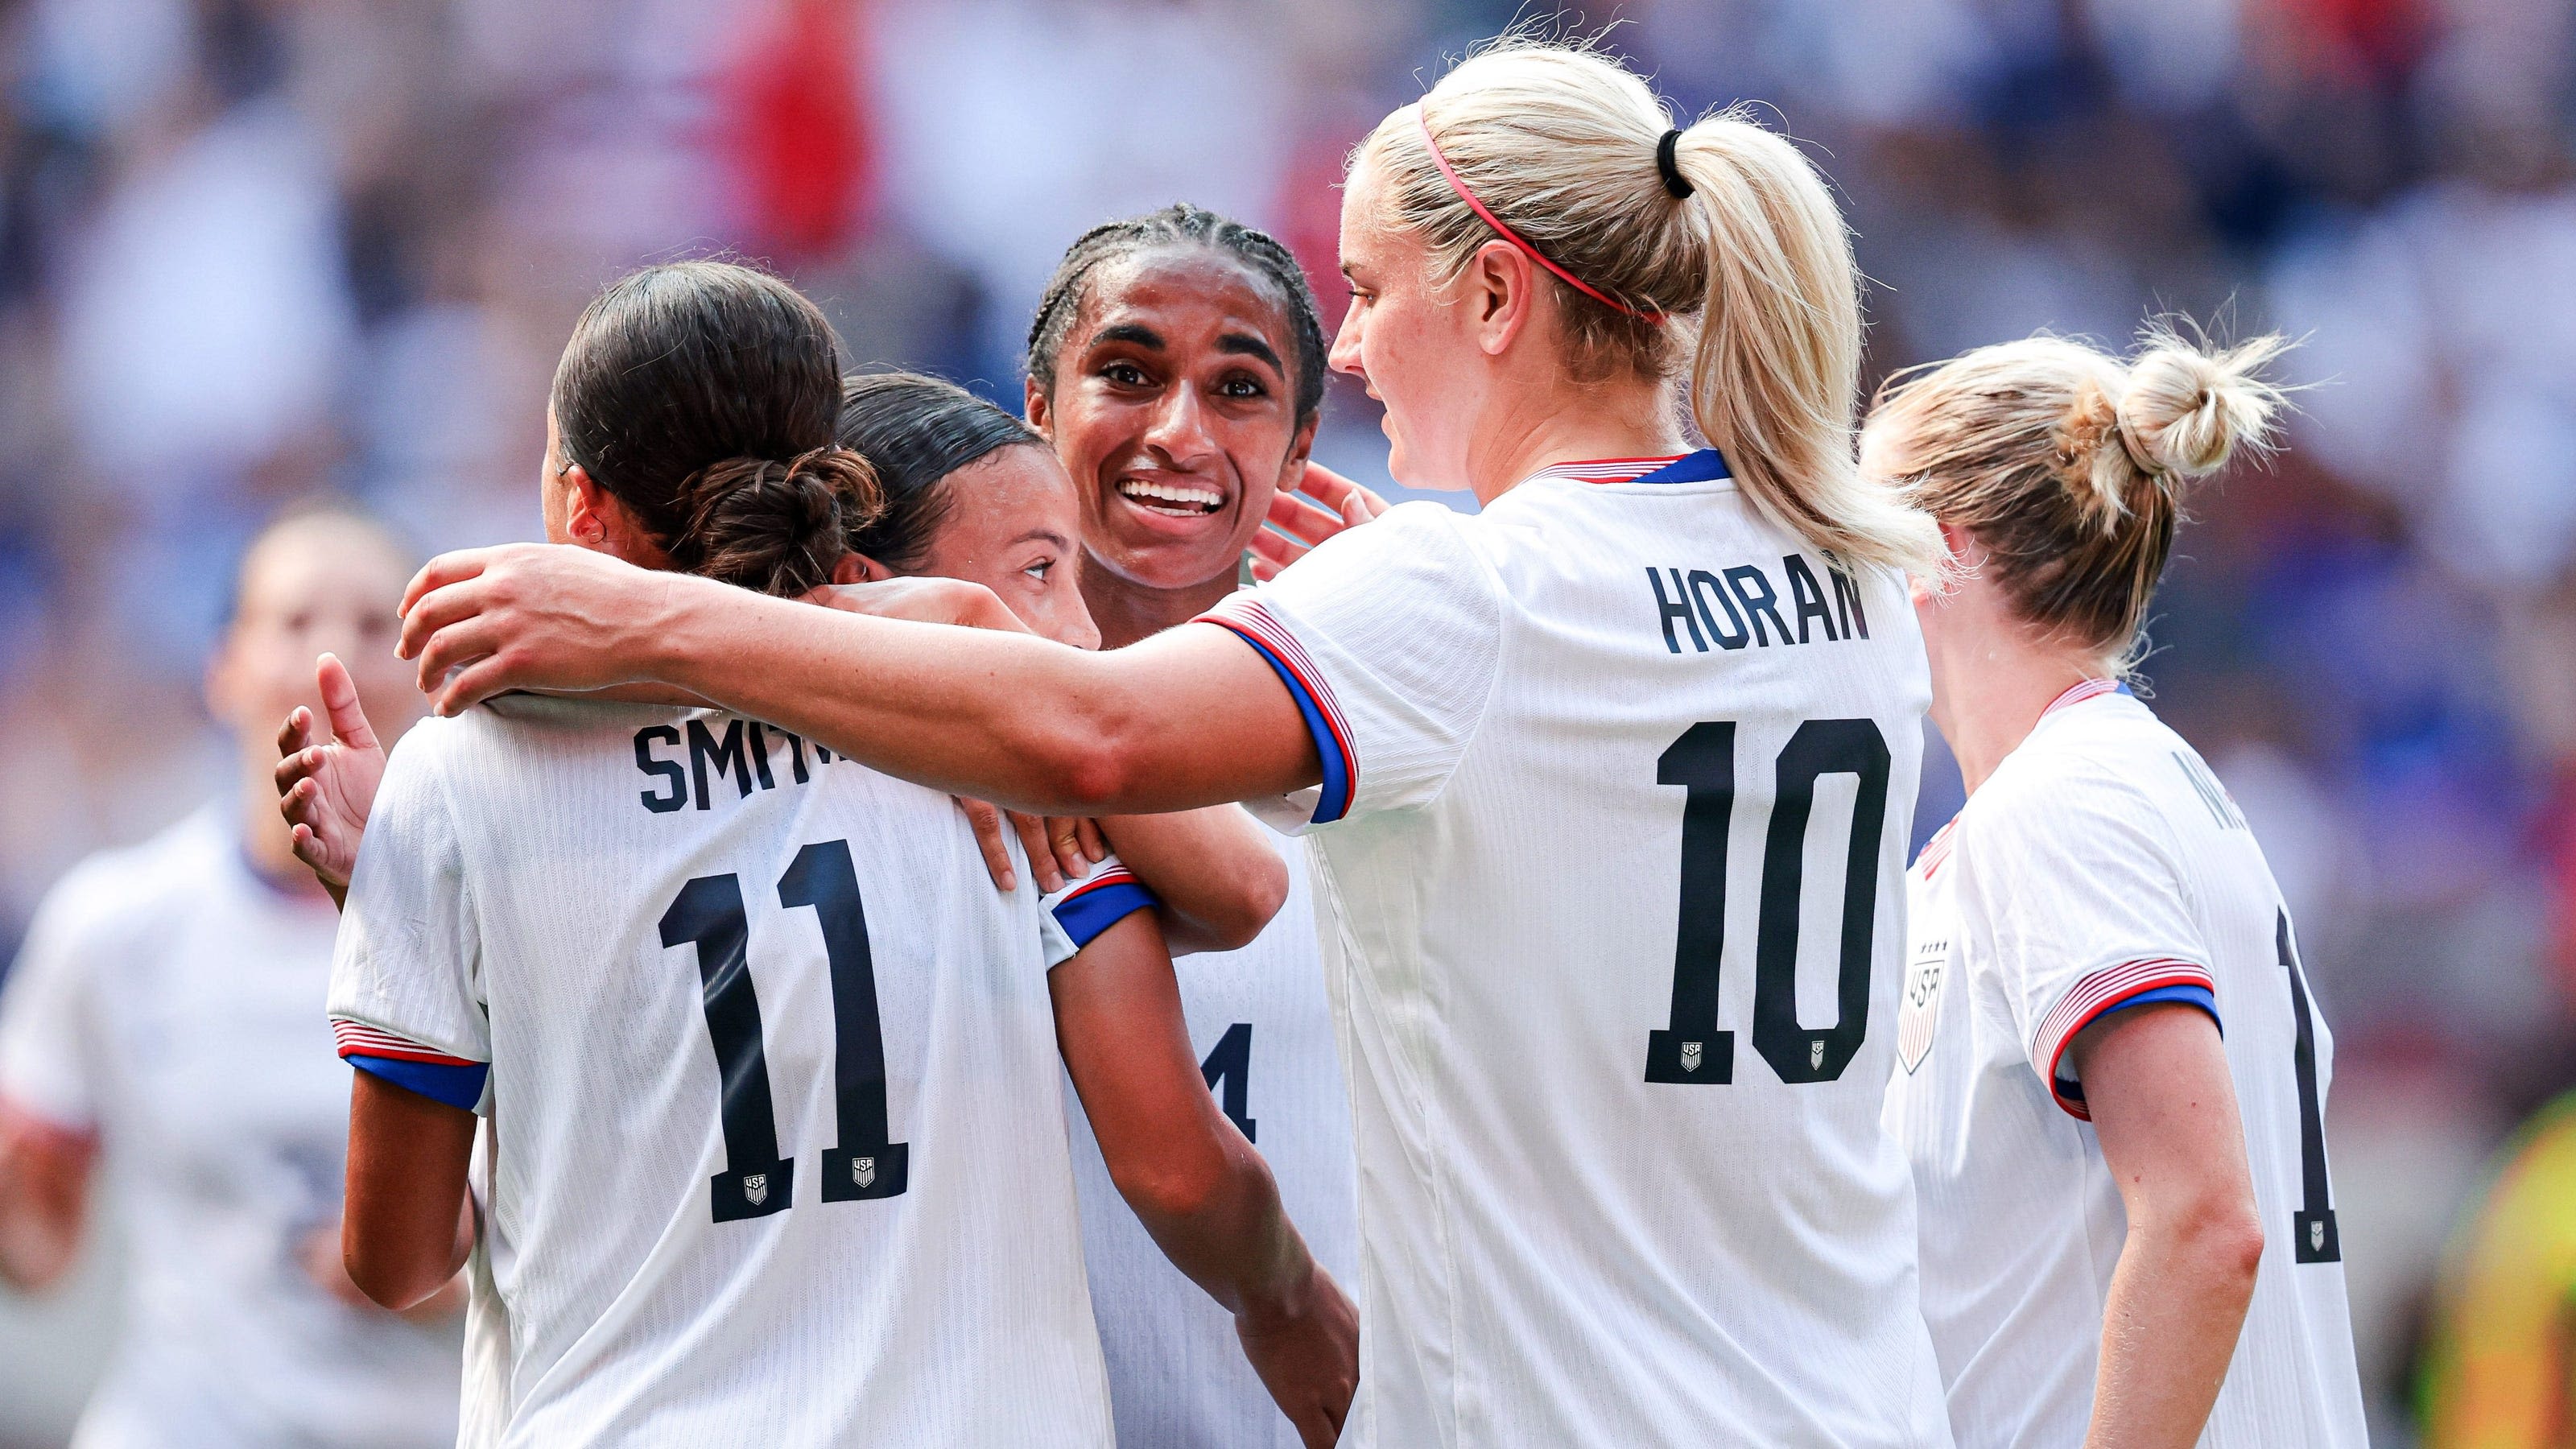 Olympic soccer games today: United States vs. Australia highlights Paris Games slate